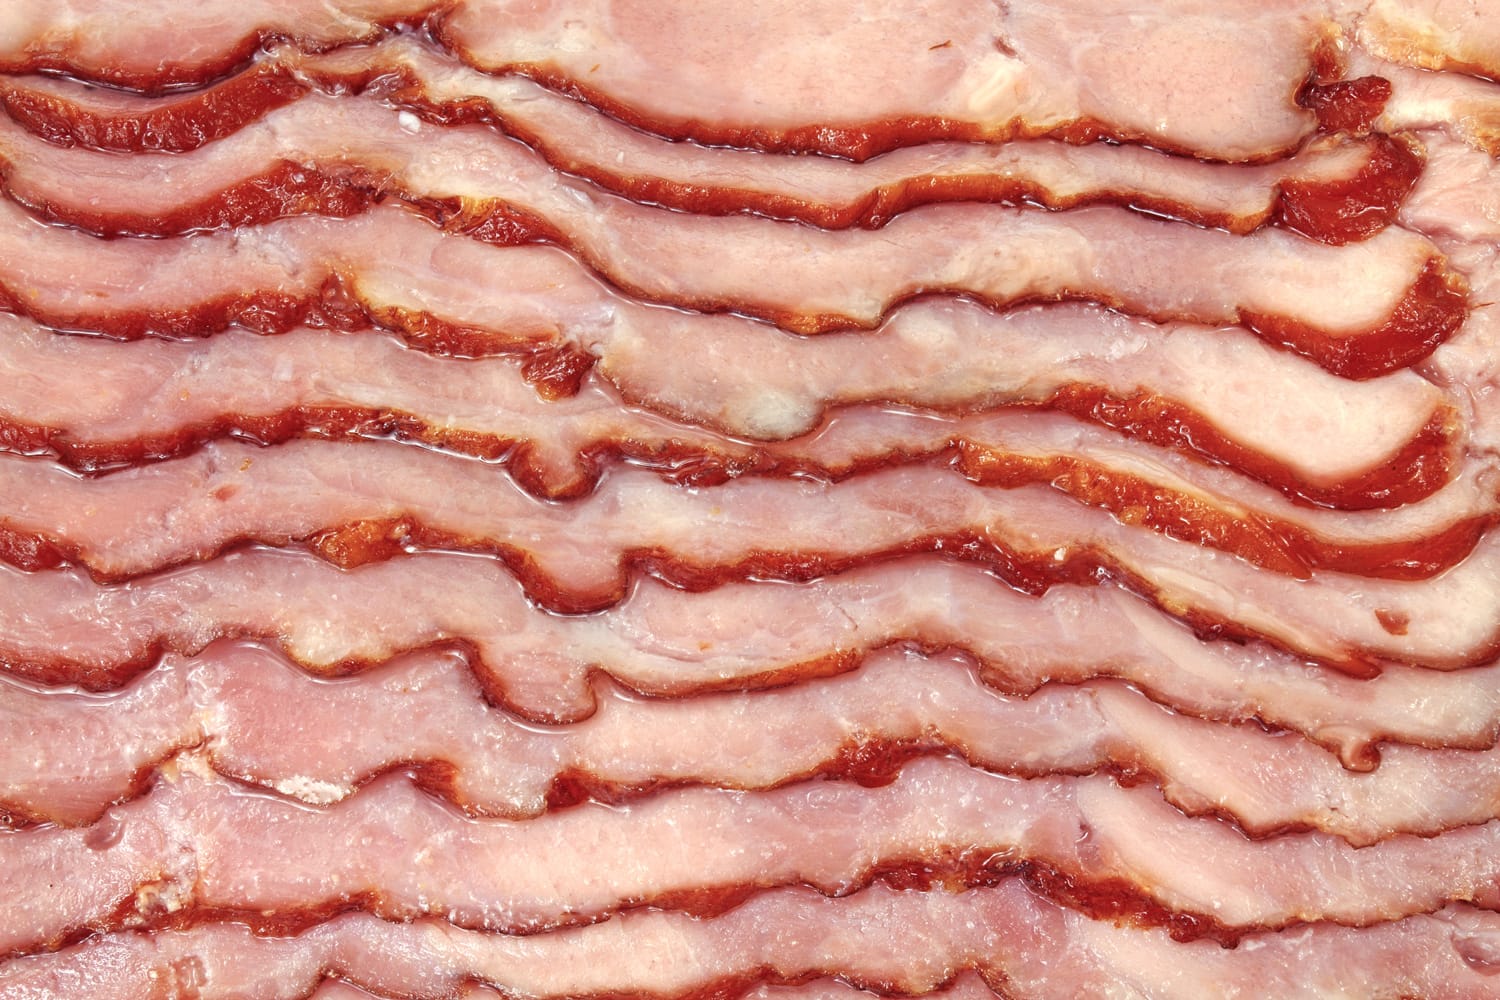 A very close view of sliced turkey bacon.